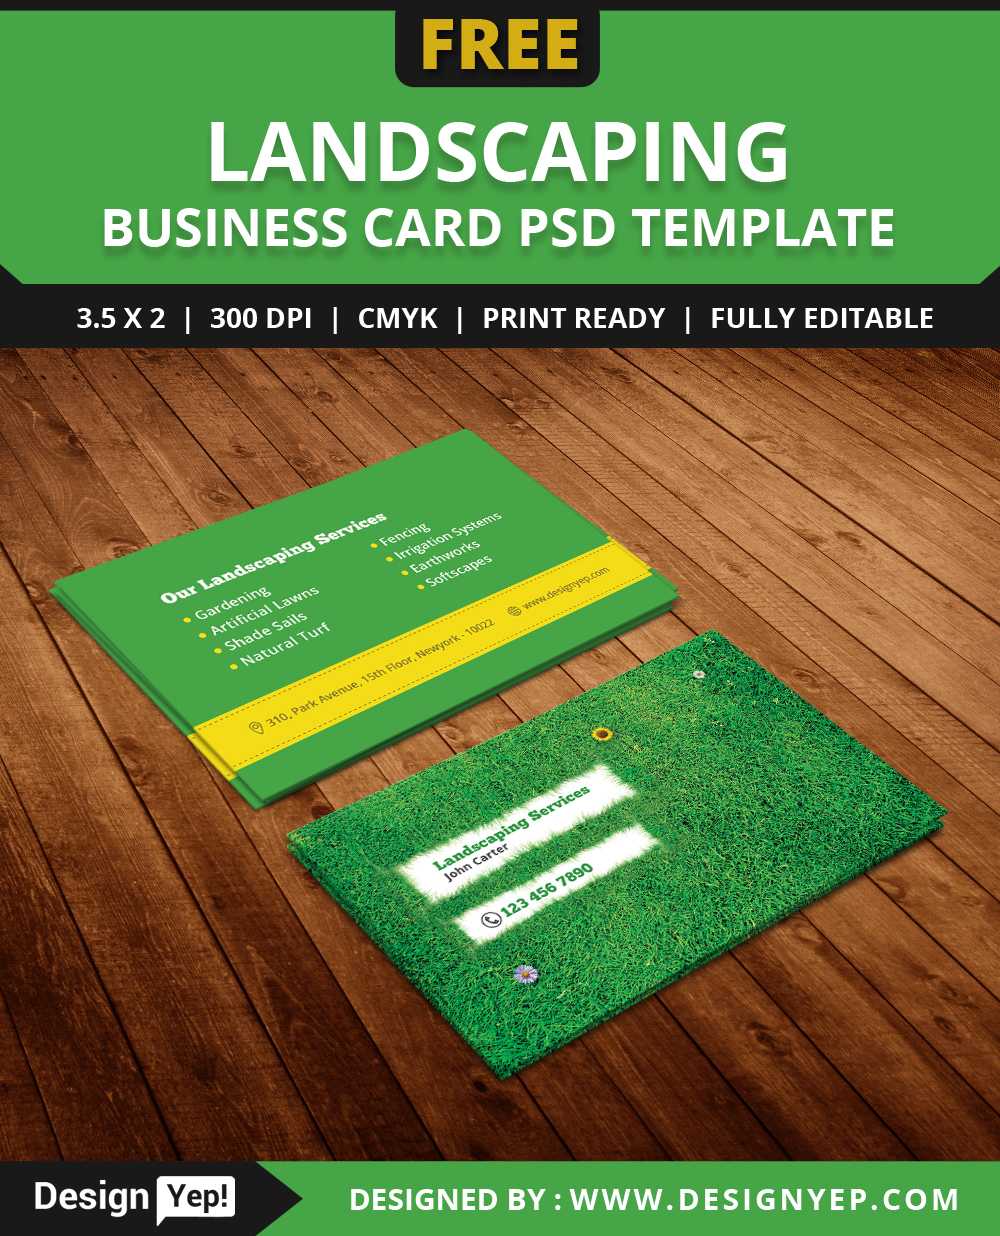 Free Landscaping Business Card Template Psd – Designyep Throughout Gardening Business Cards Templates